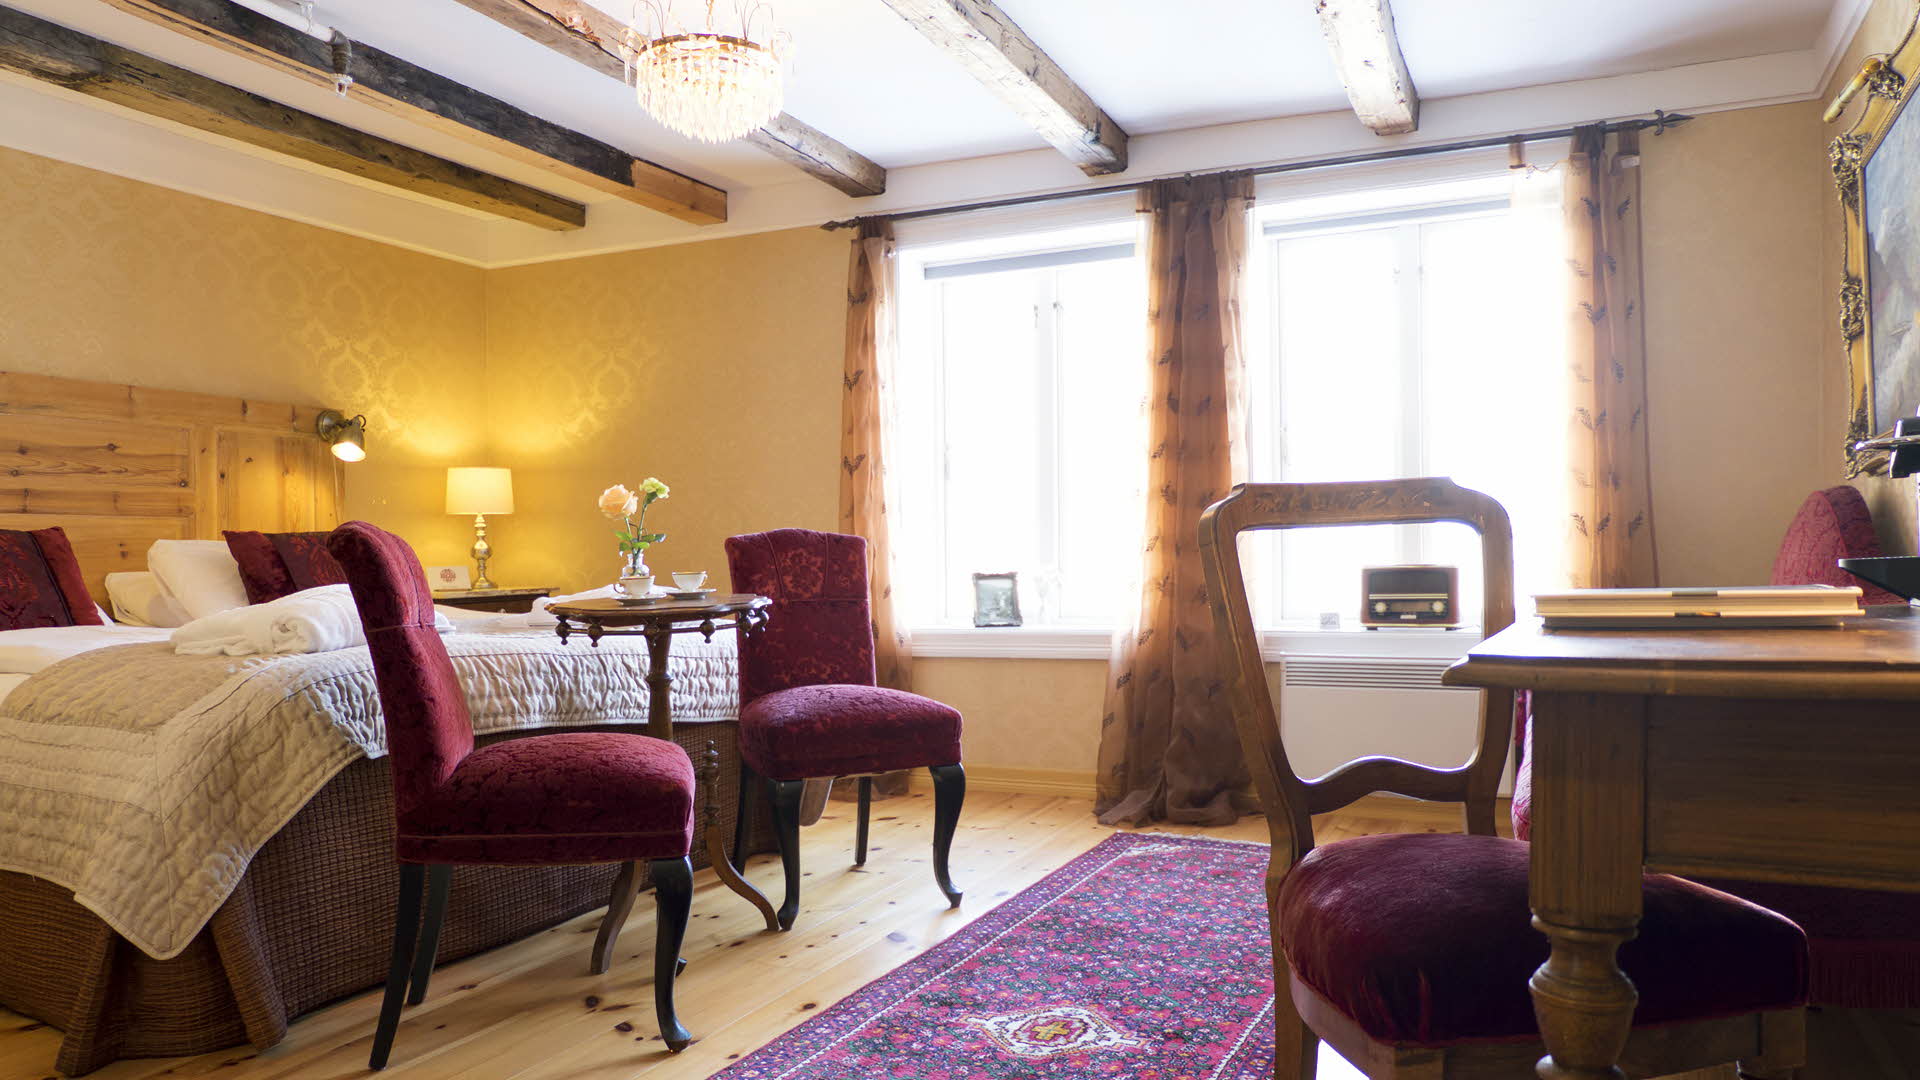 Historic room at Fretheim Hotel in Flåm, yellow walls and burgundy furnishings